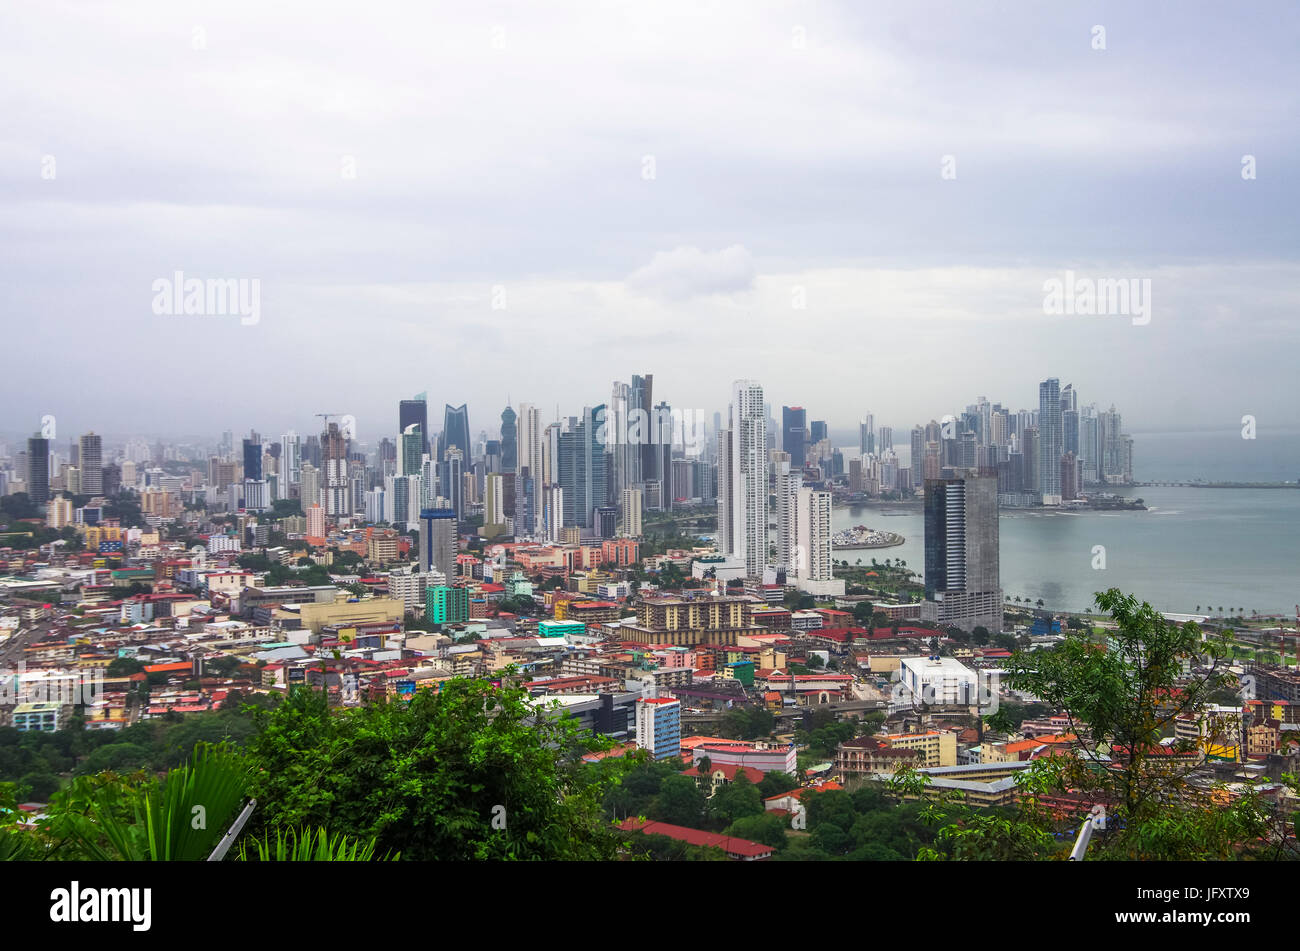 Panama city panorama Banque D'Images